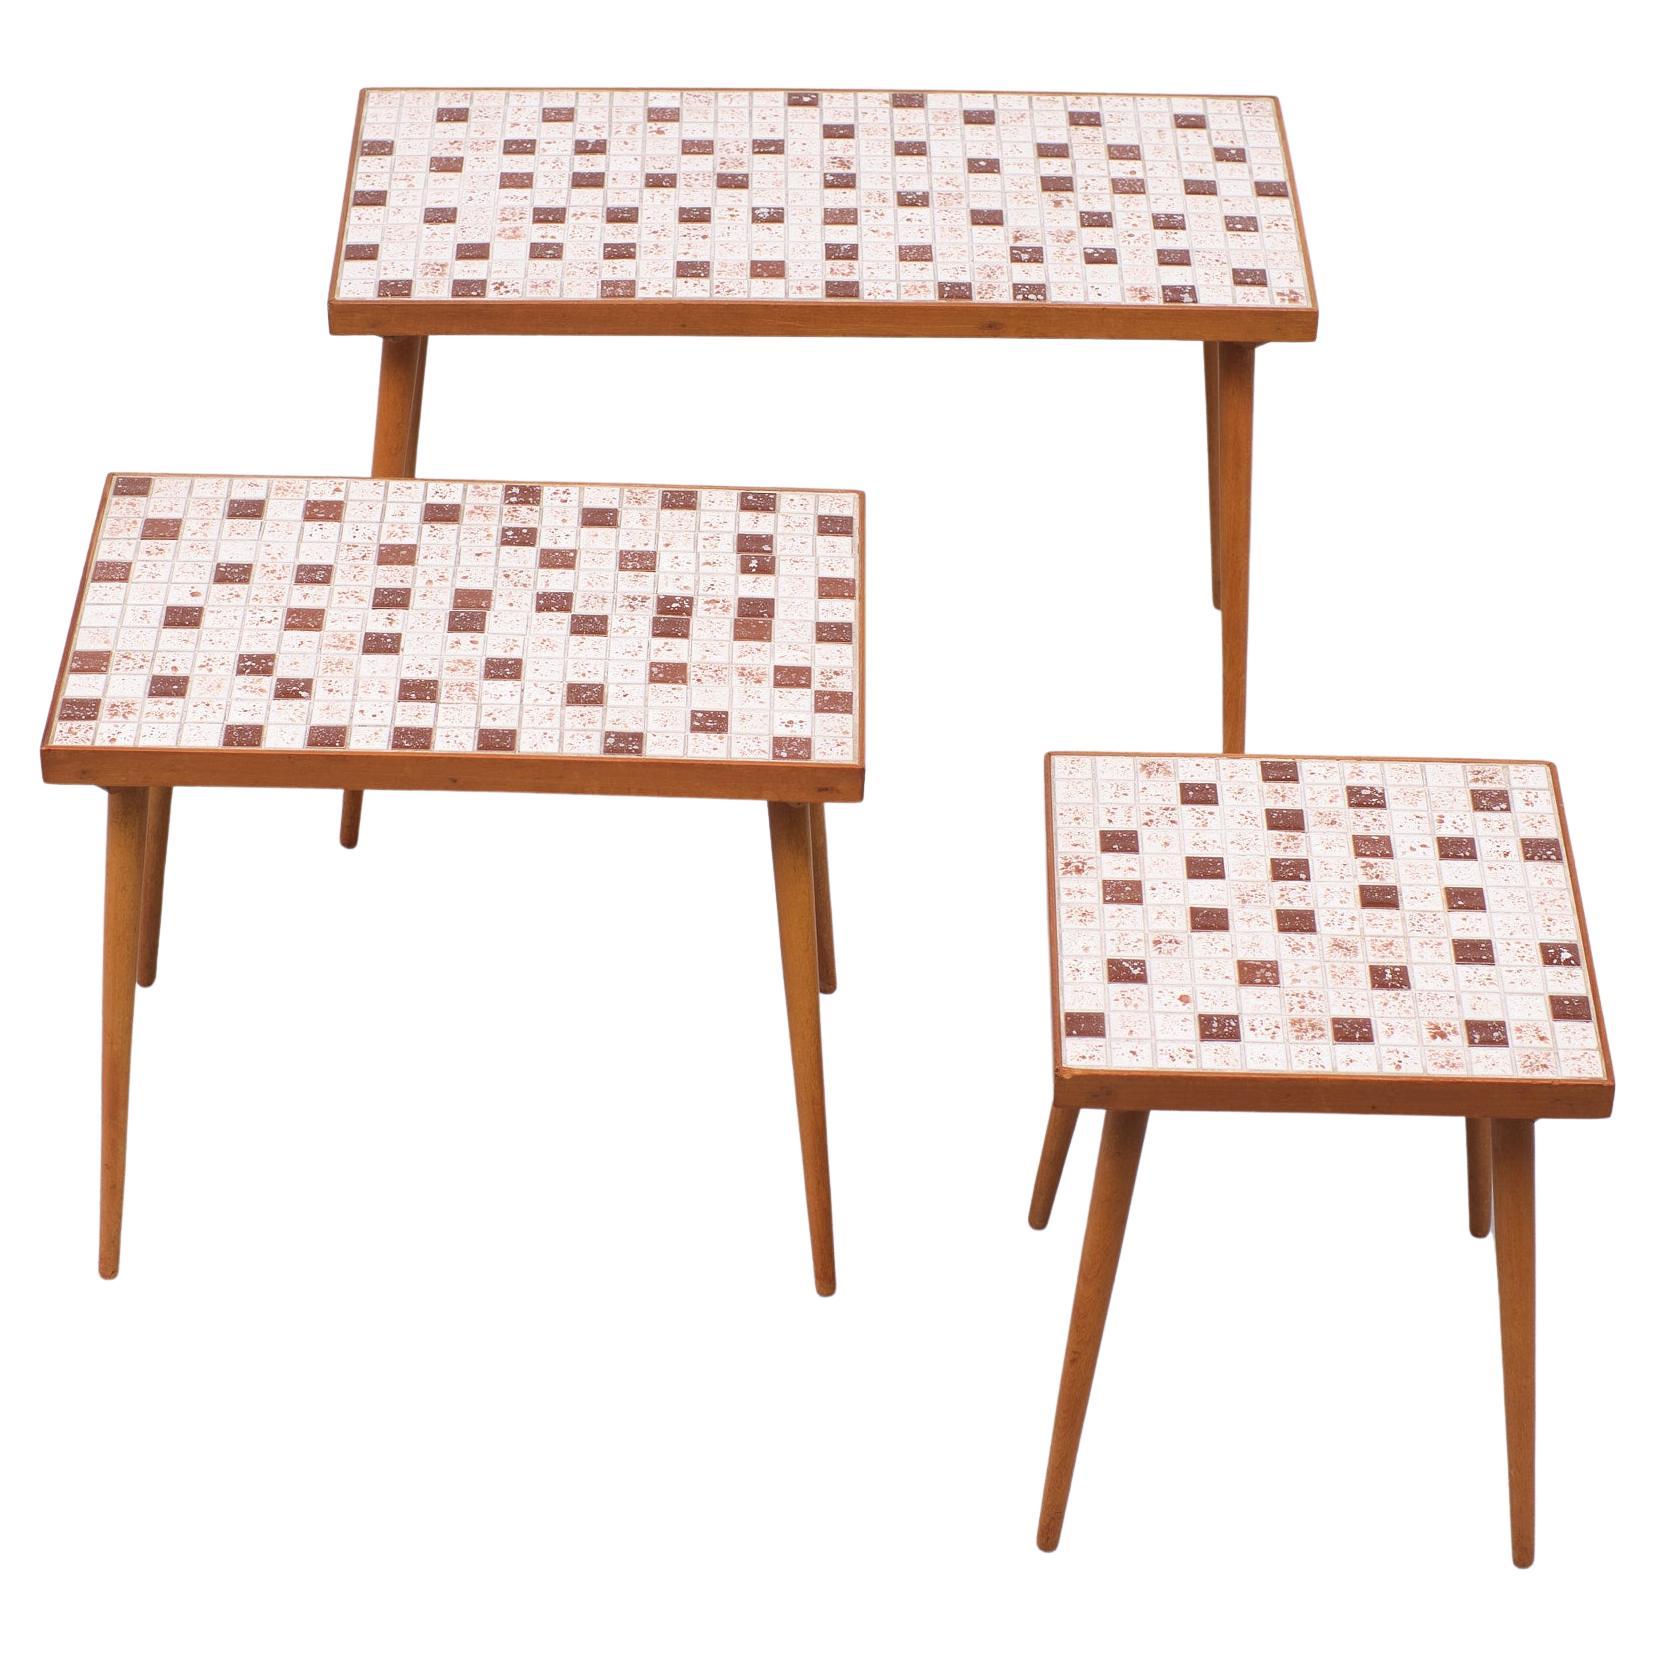 Very nice set of nesting tables, Elegant Teak feet, comes with little Ceramic Mosaic tiles.
in several shades of Brown. Very good condition.